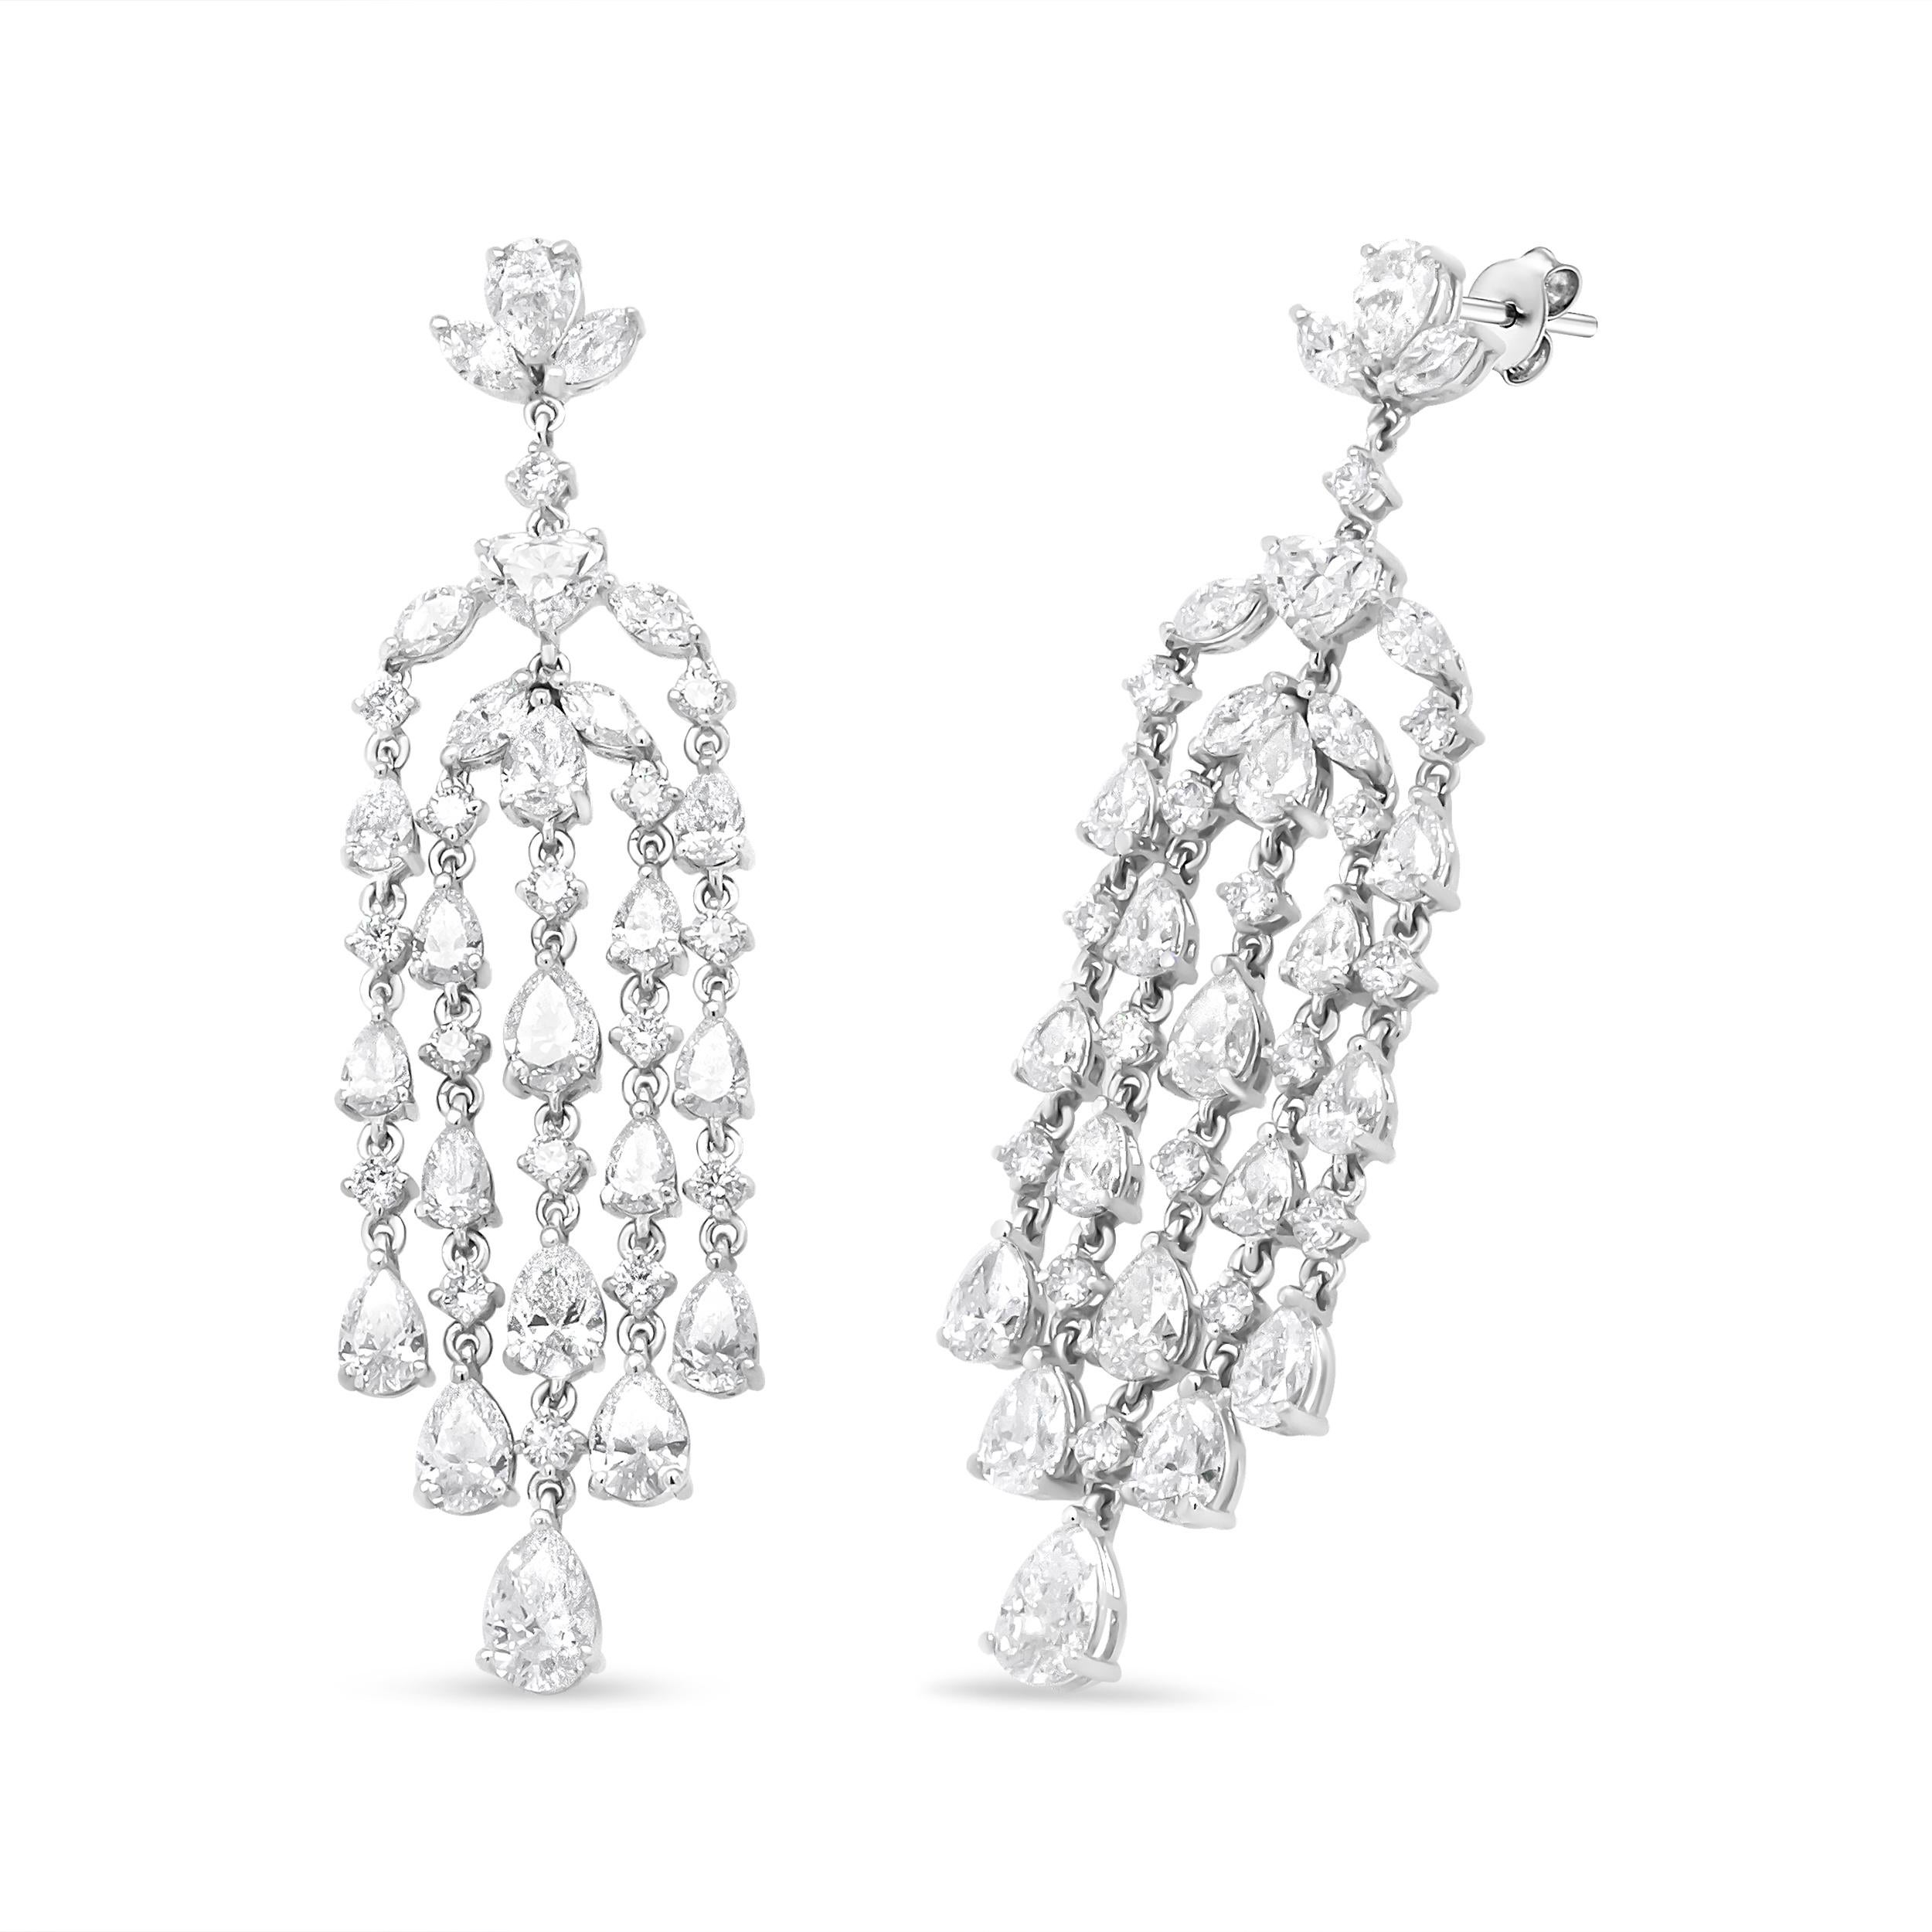 Indulge yourself with these dramatic diamond chandelier earrings for her. Polished in genuine 18k white gold, this jaw-dropping design beholds a captivating presentation of alluring diamonds that hold a total 11 1/8 cttw and an approximate VS1-VS2